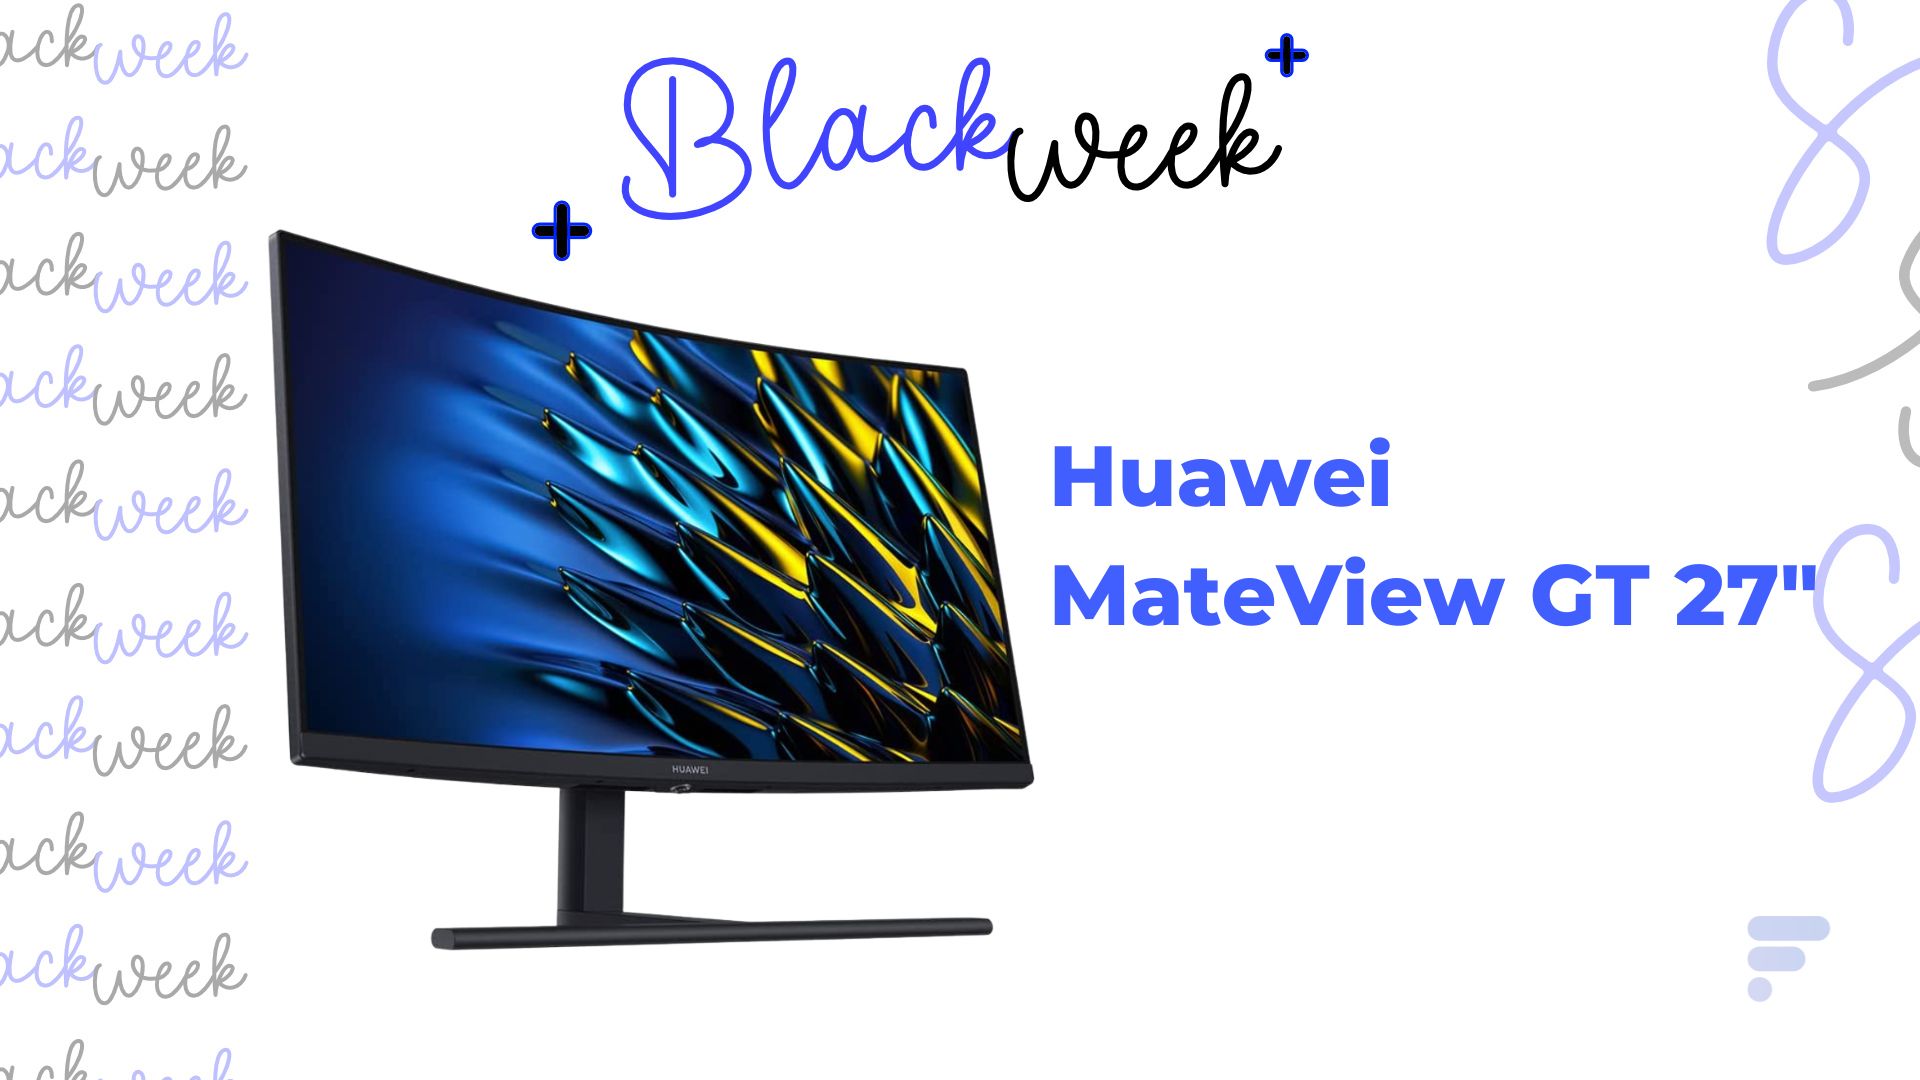 https://images.frandroid.com/wp-content/uploads/2022/11/huawei-mateview-gt-27-black-friday-2022.jpg